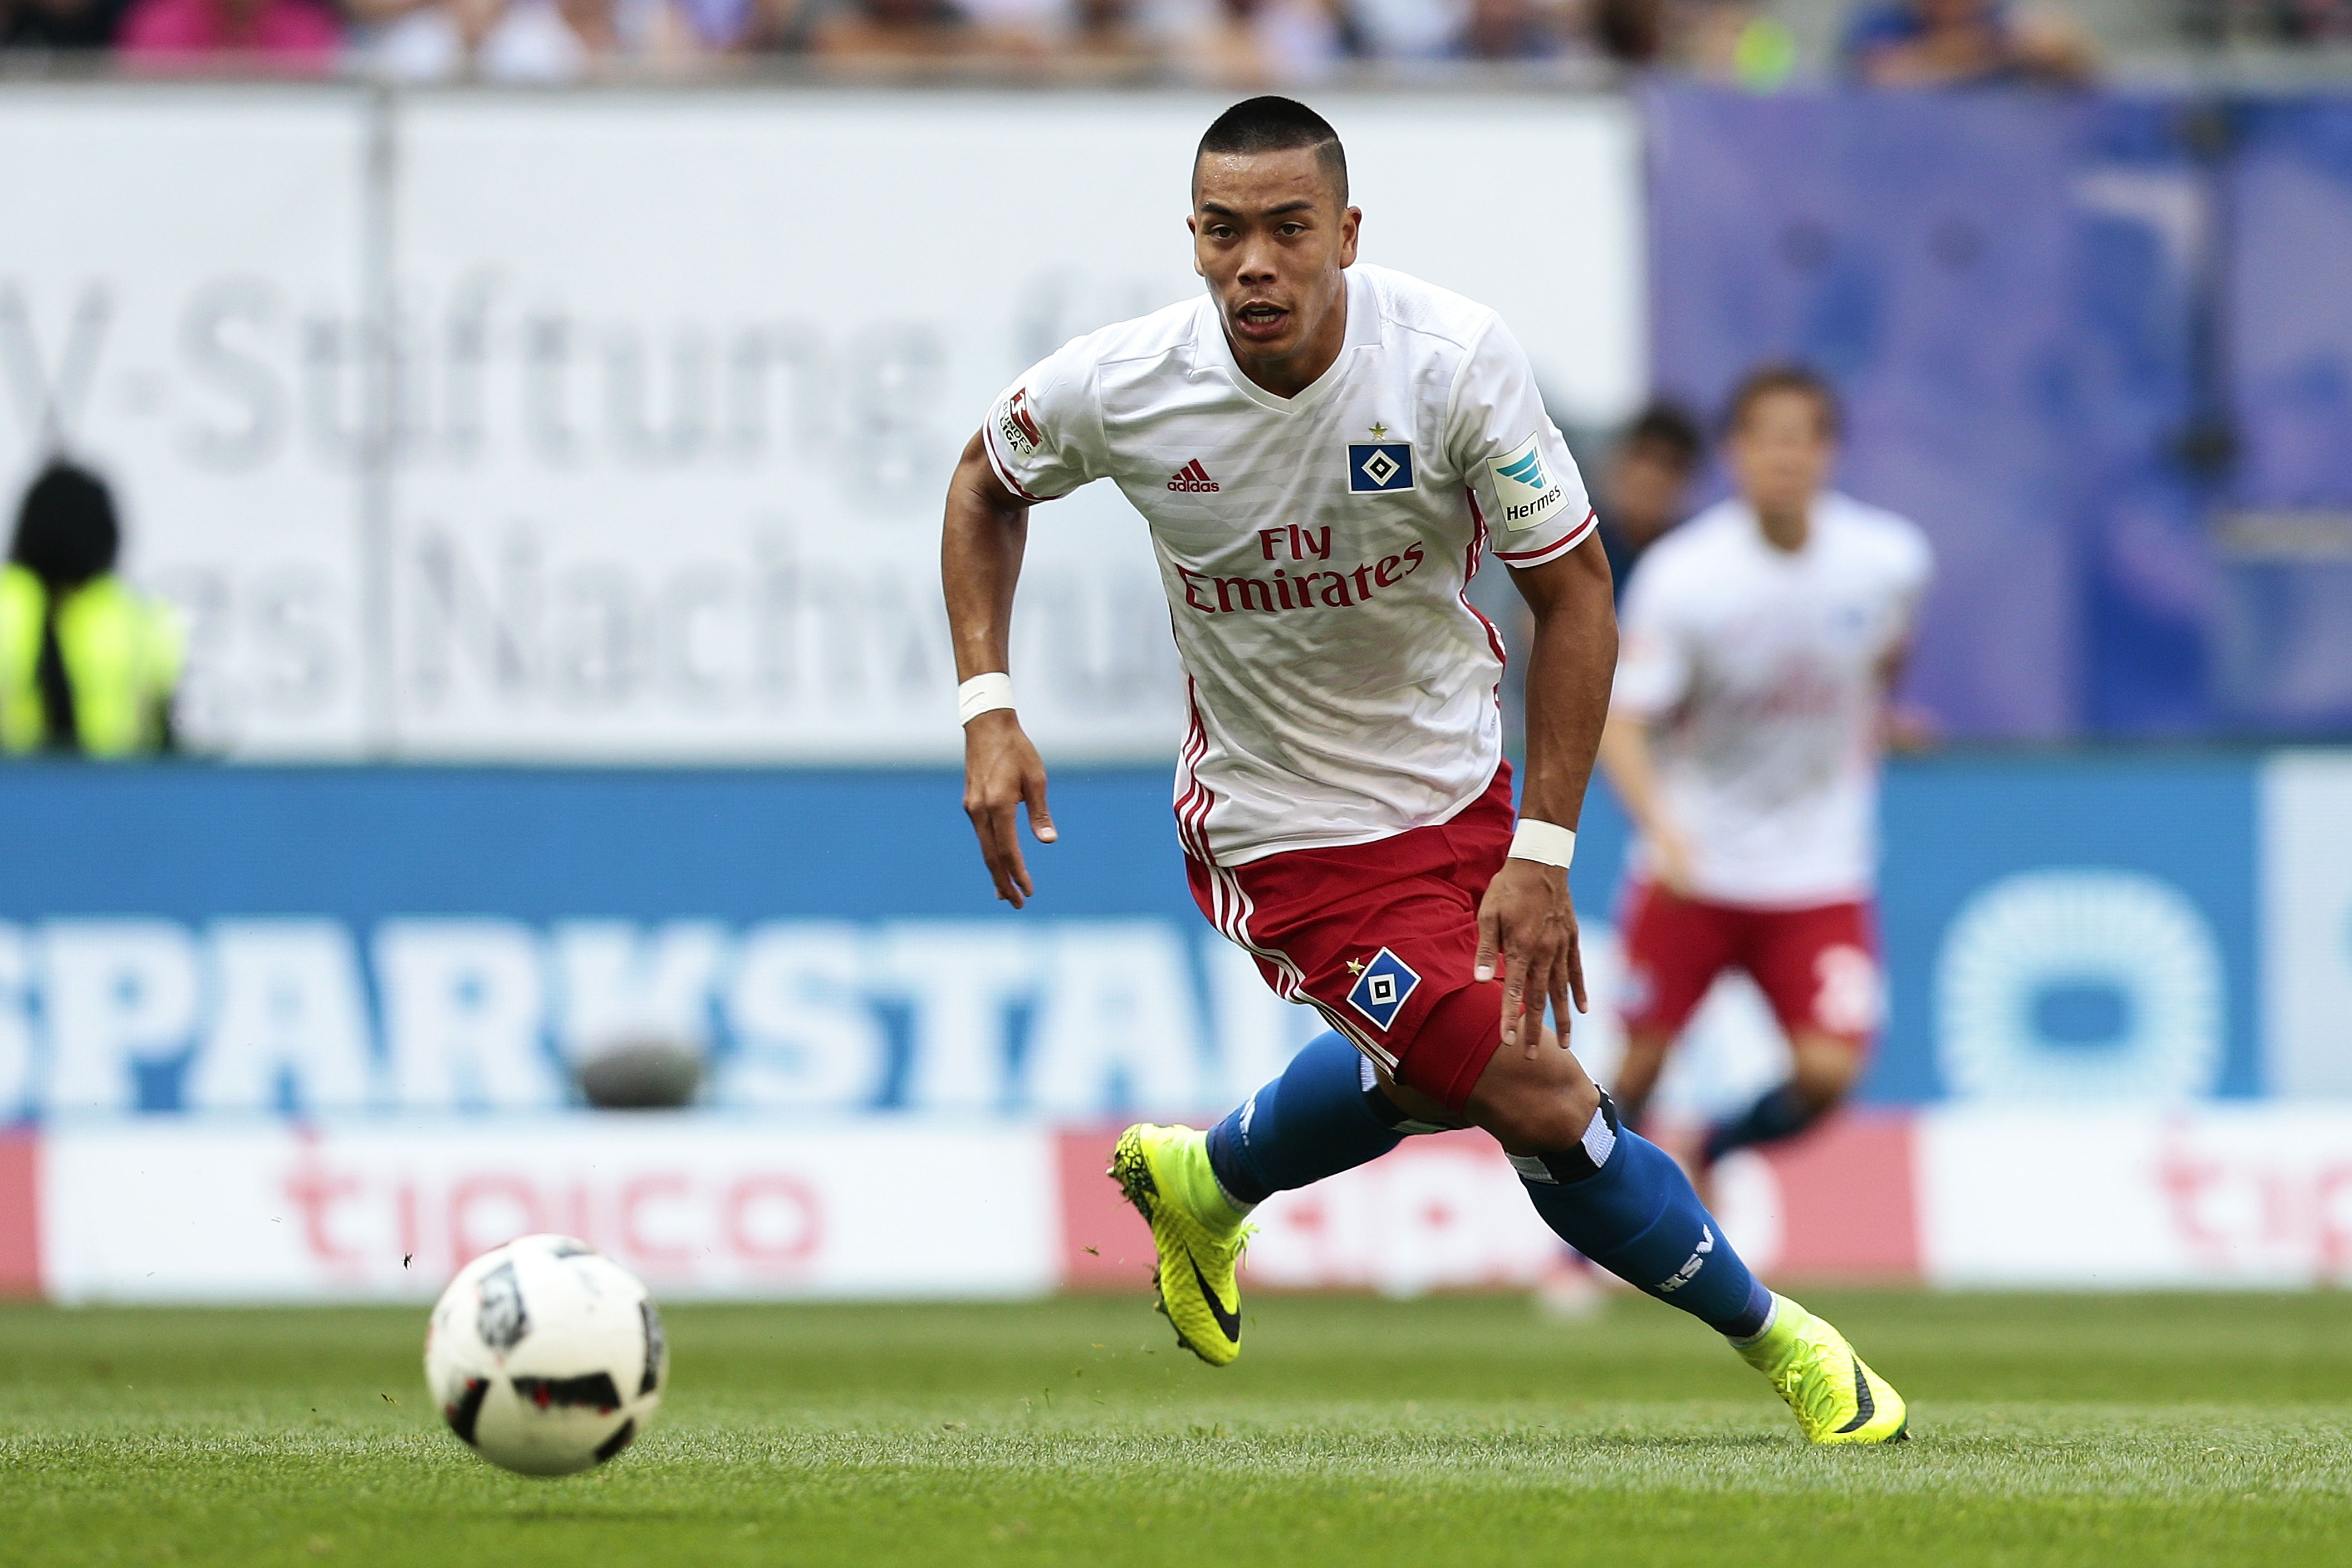 HAMBURG, GERMANY - AUGUST 27: Bobby Wood of Hamburg in action during the Bundesliga match between Hamburger SV and FC Ingolstadt 04 at Volksparkstadion on August 27, 2016 in Hamburg, Germany. (Photo by Oliver Hardt/Bongarts/Getty Images)